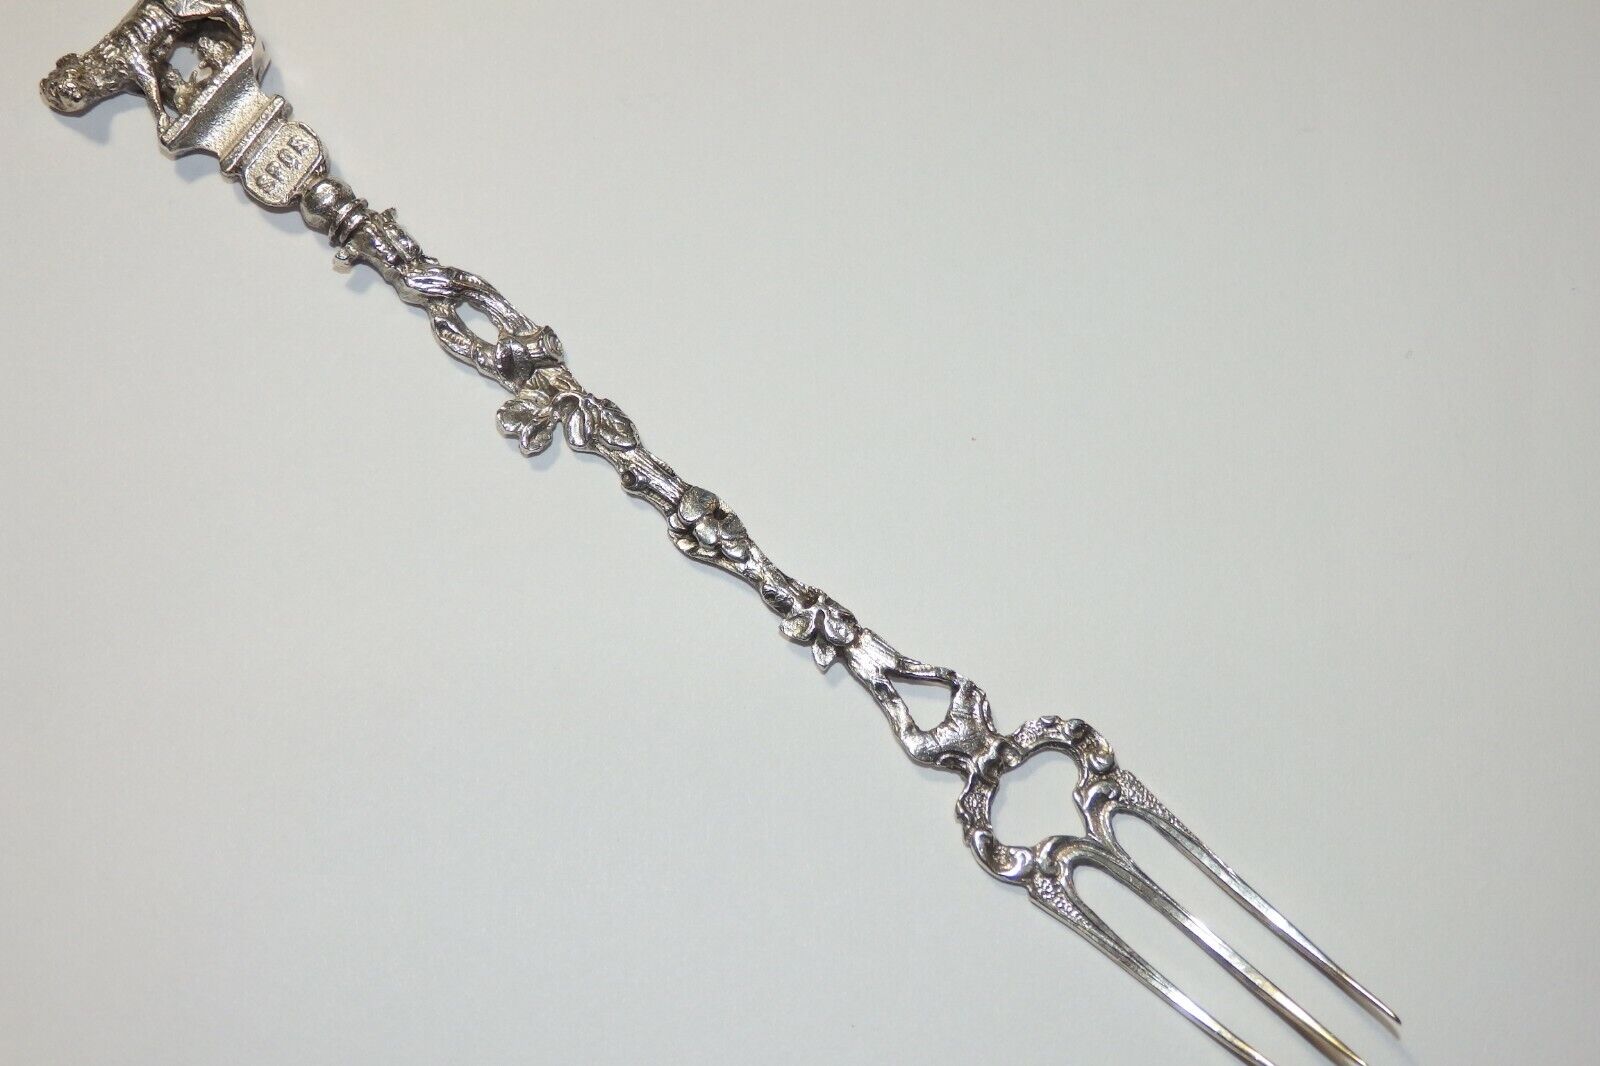 Antique 800 Sterling Silver Rome Roma Spor Romulus Remus Figural Cocktail Fork